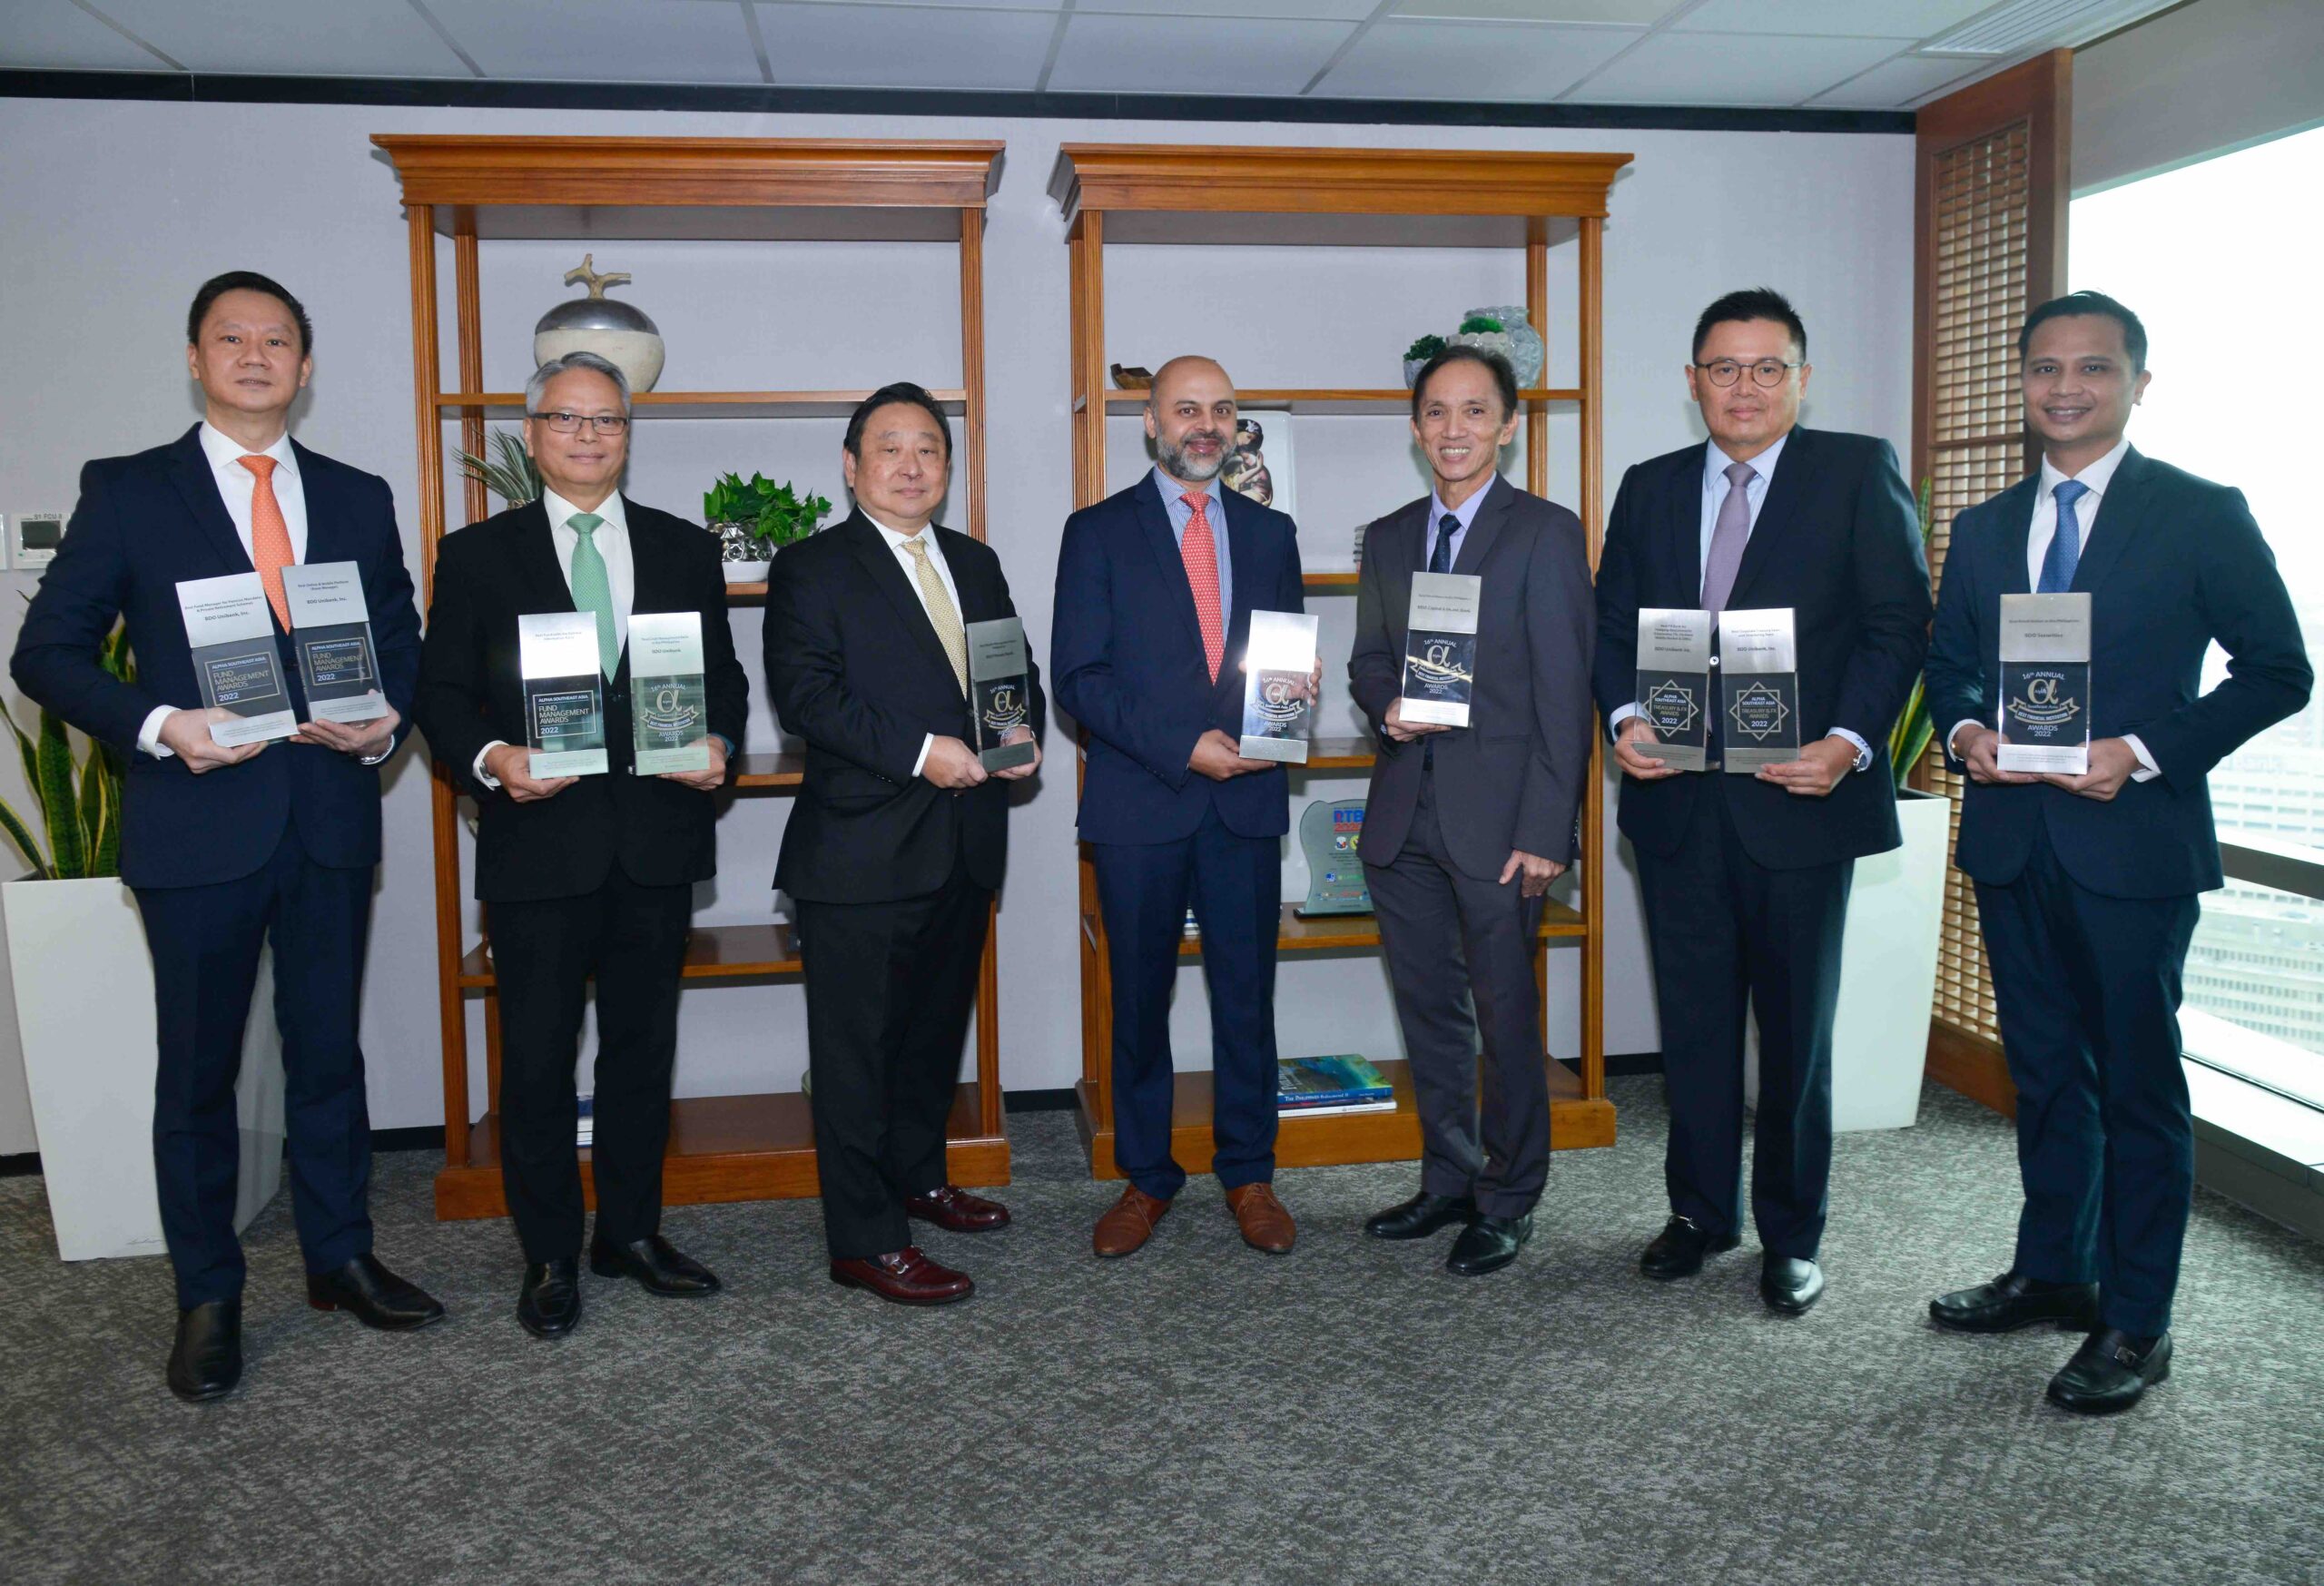 BDO wins multiple awards, recognized by Hong Kong publication as Best Bank in PH